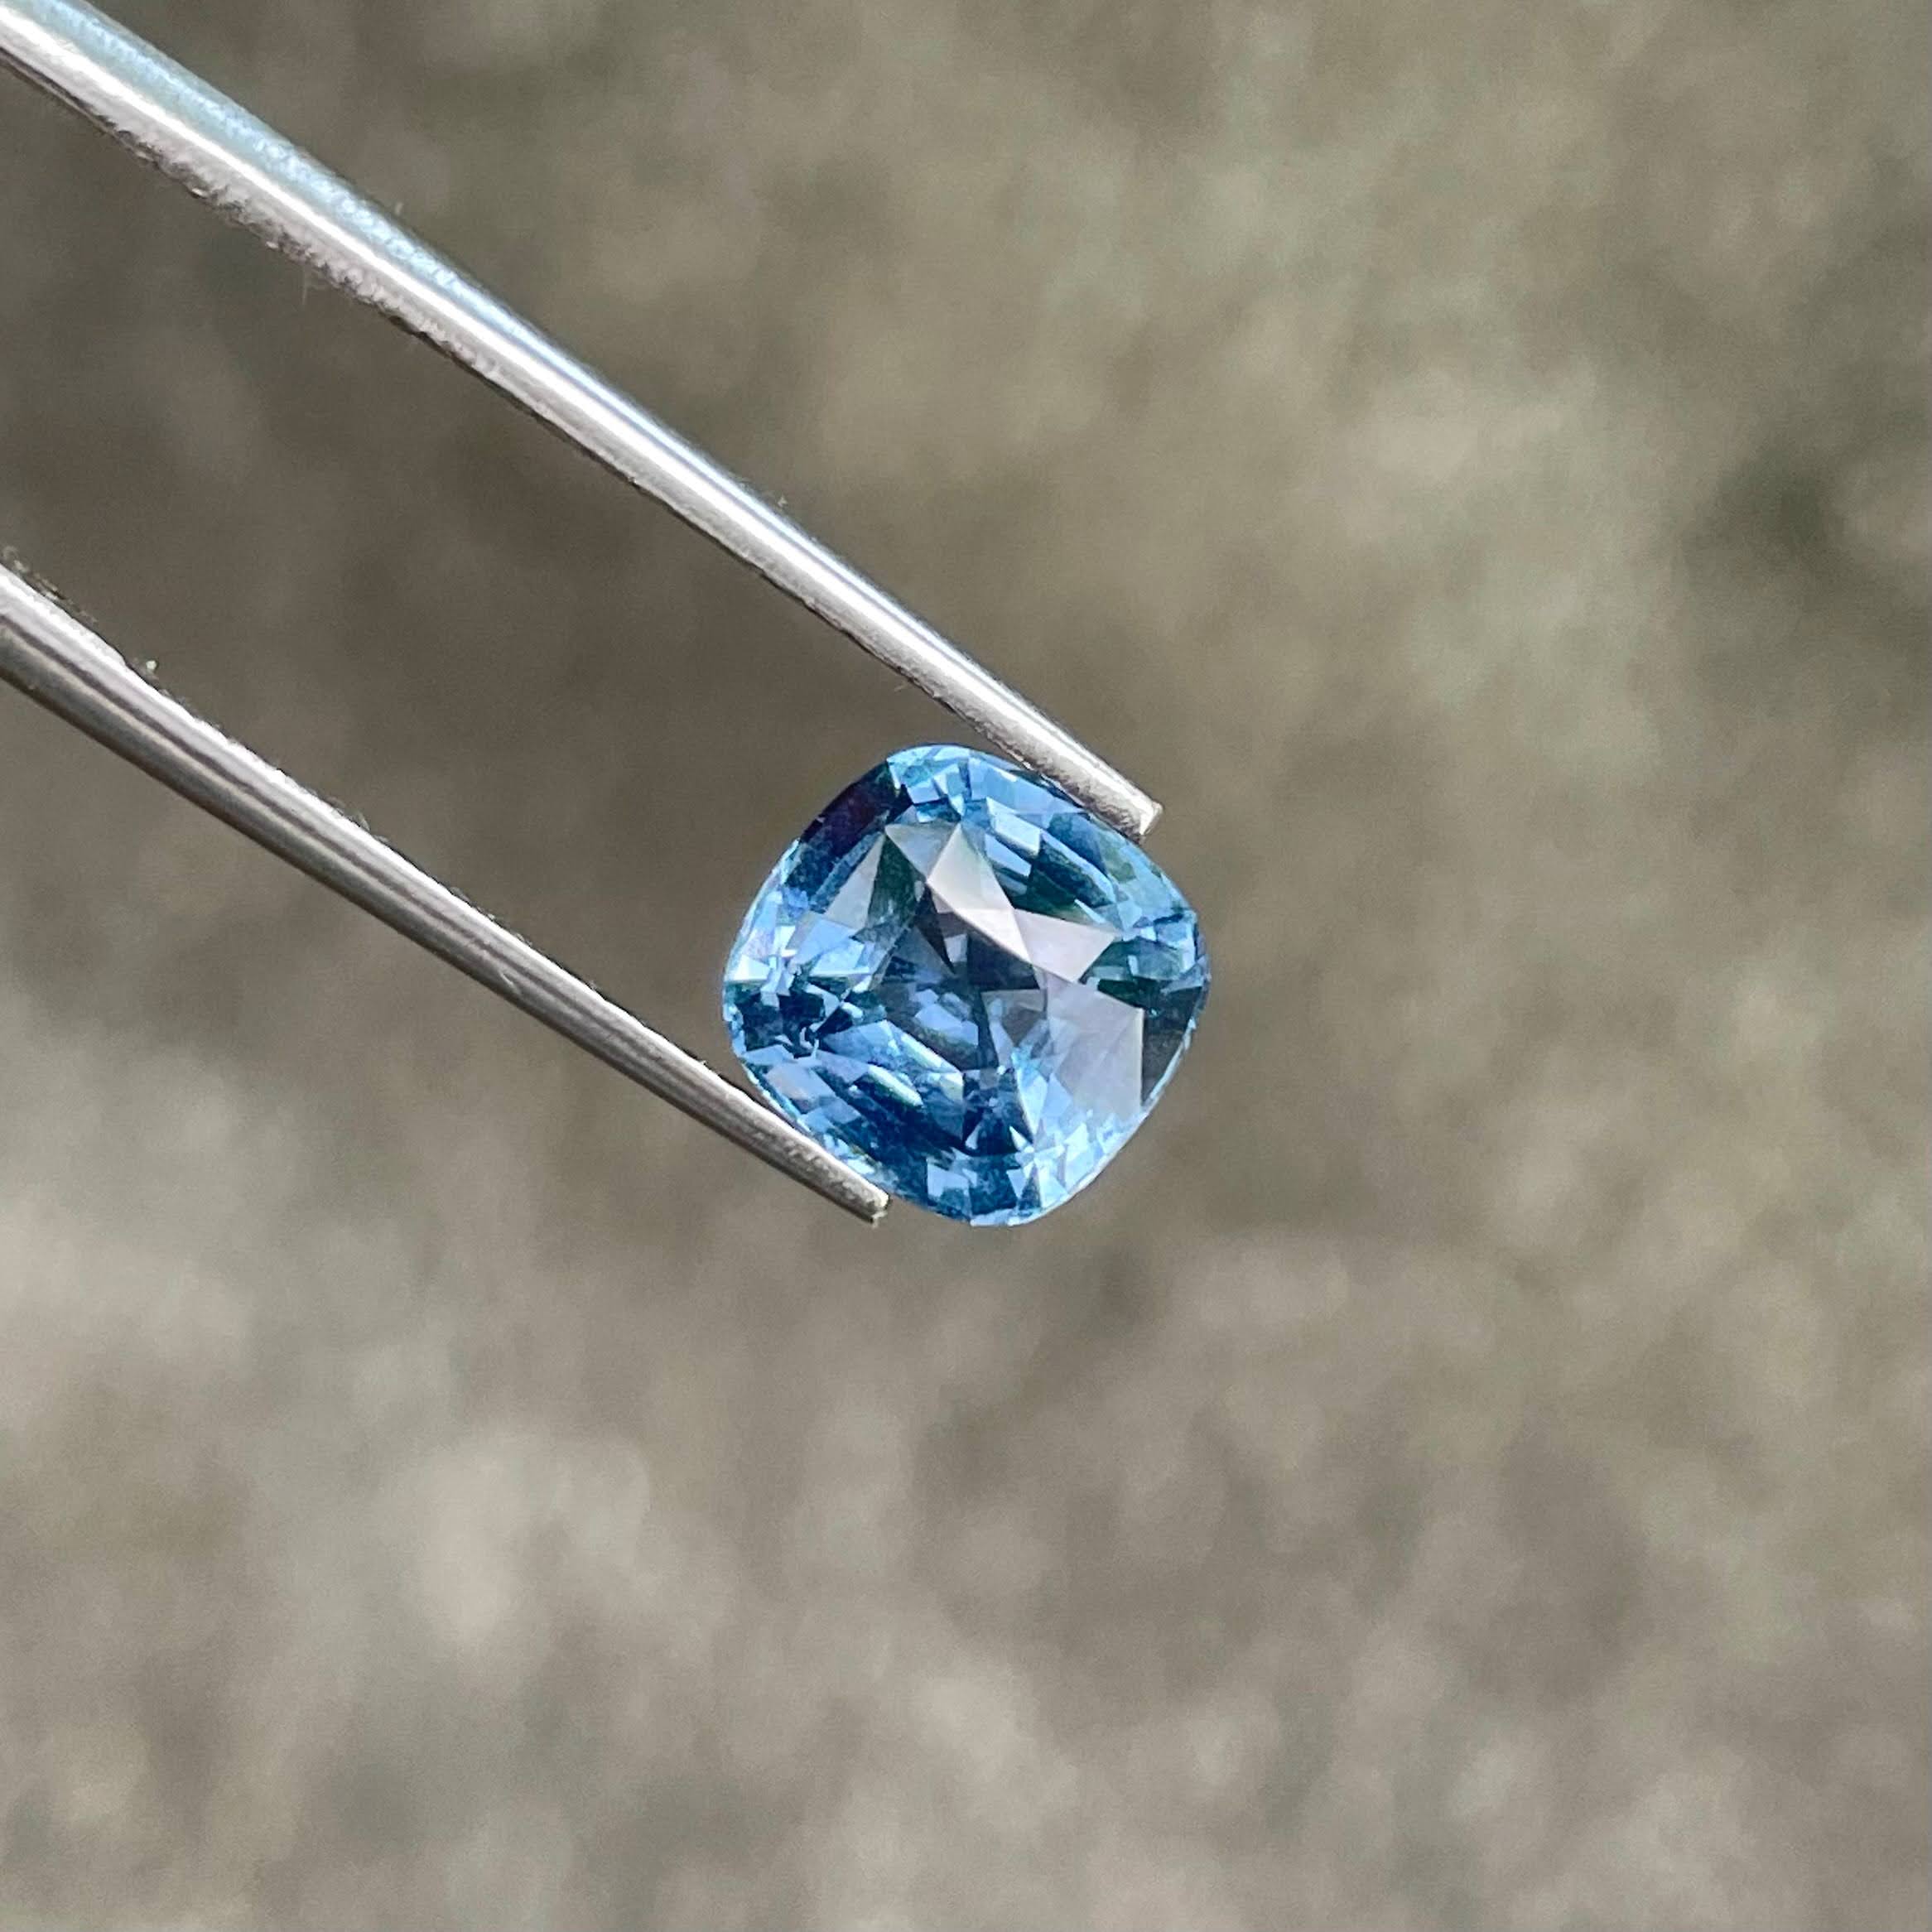 3.06 Carats Light Blue Spinel Stone